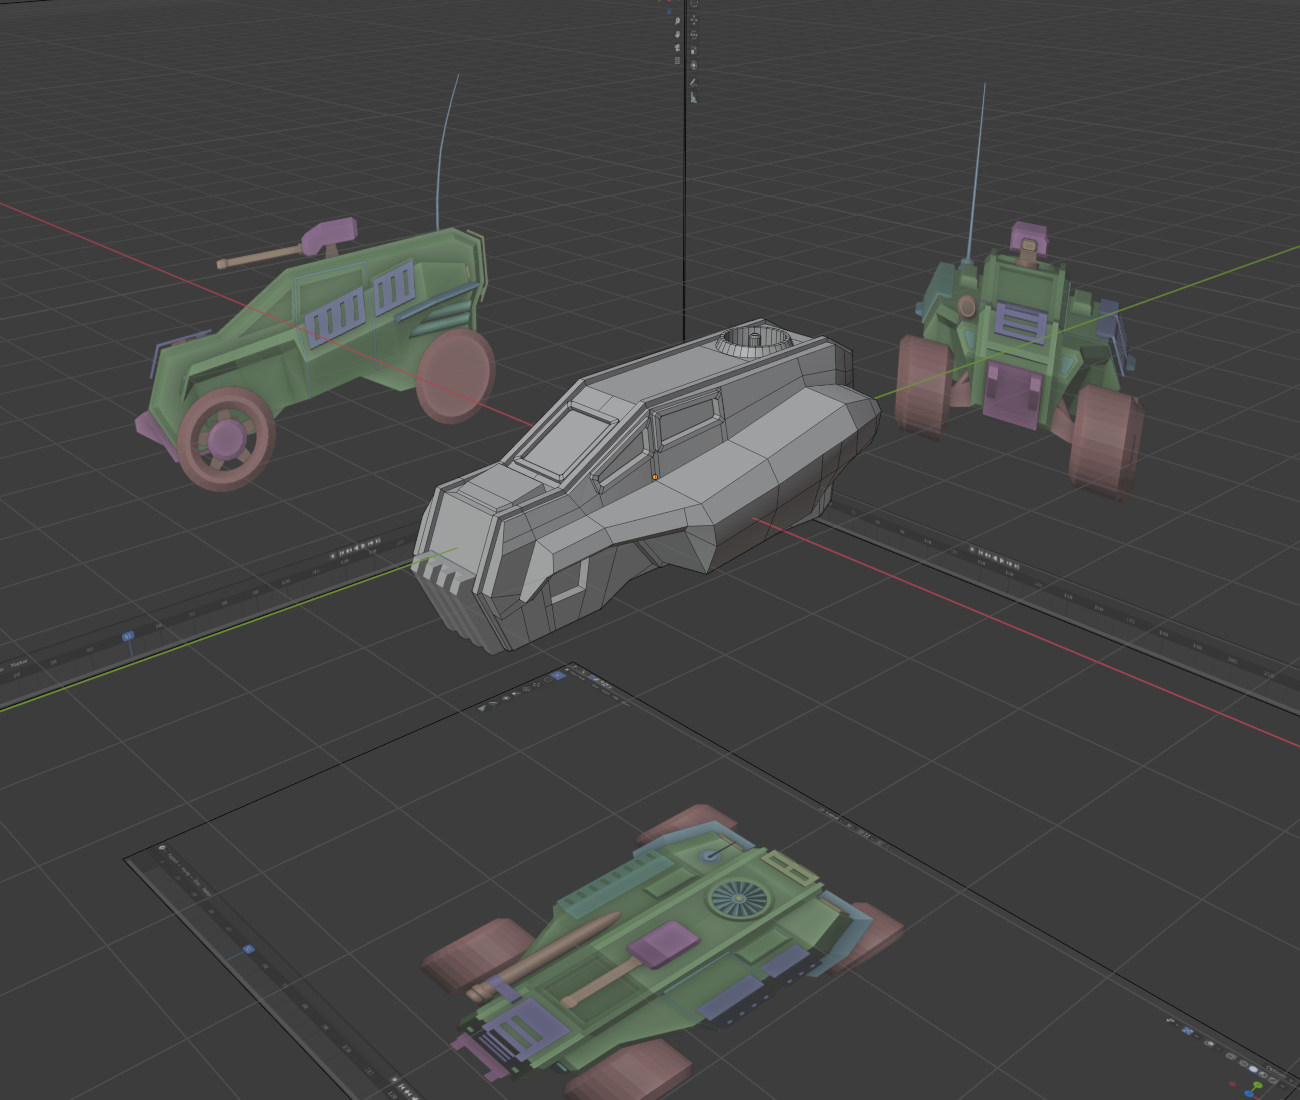 Final chassis model in Blender with images of blockout model to aid with modeling